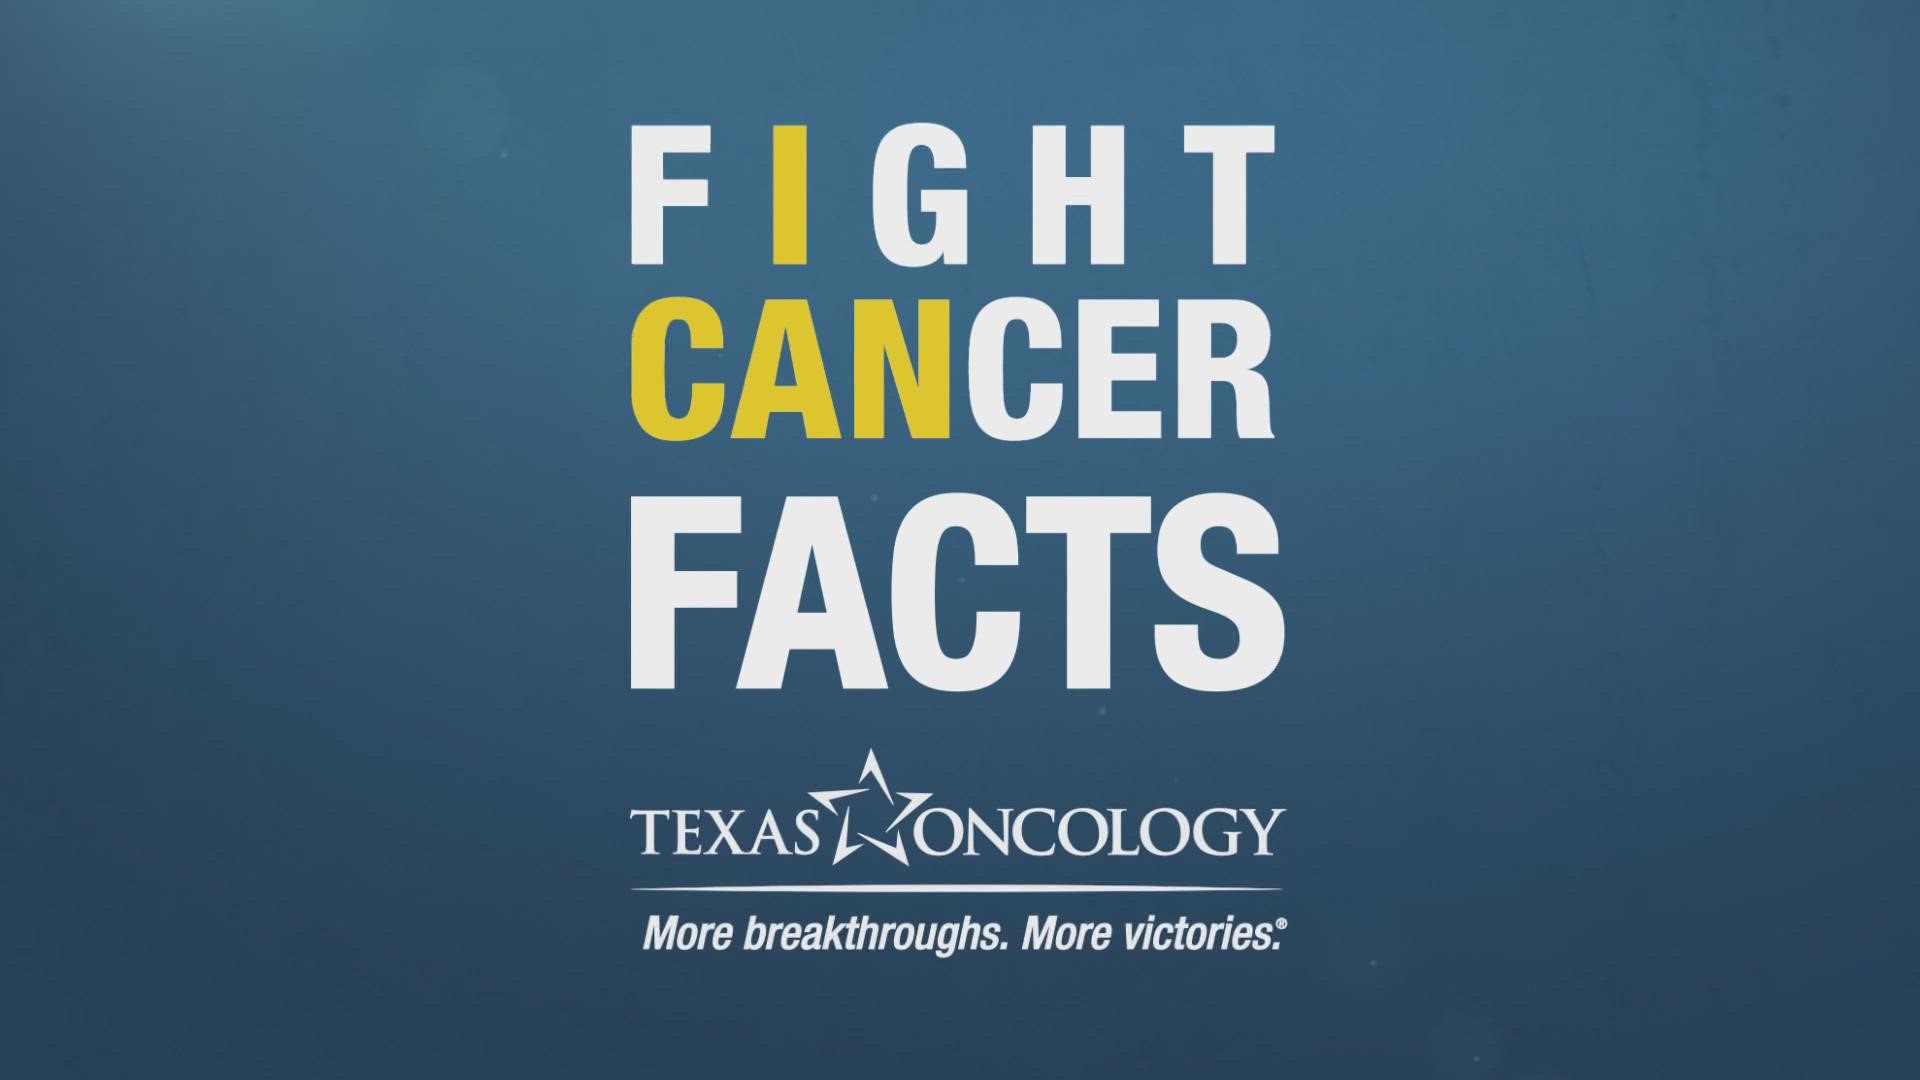 Local Texas Oncology doctor explains how personal and family history may increase the risk of developing gynecologic cancers.